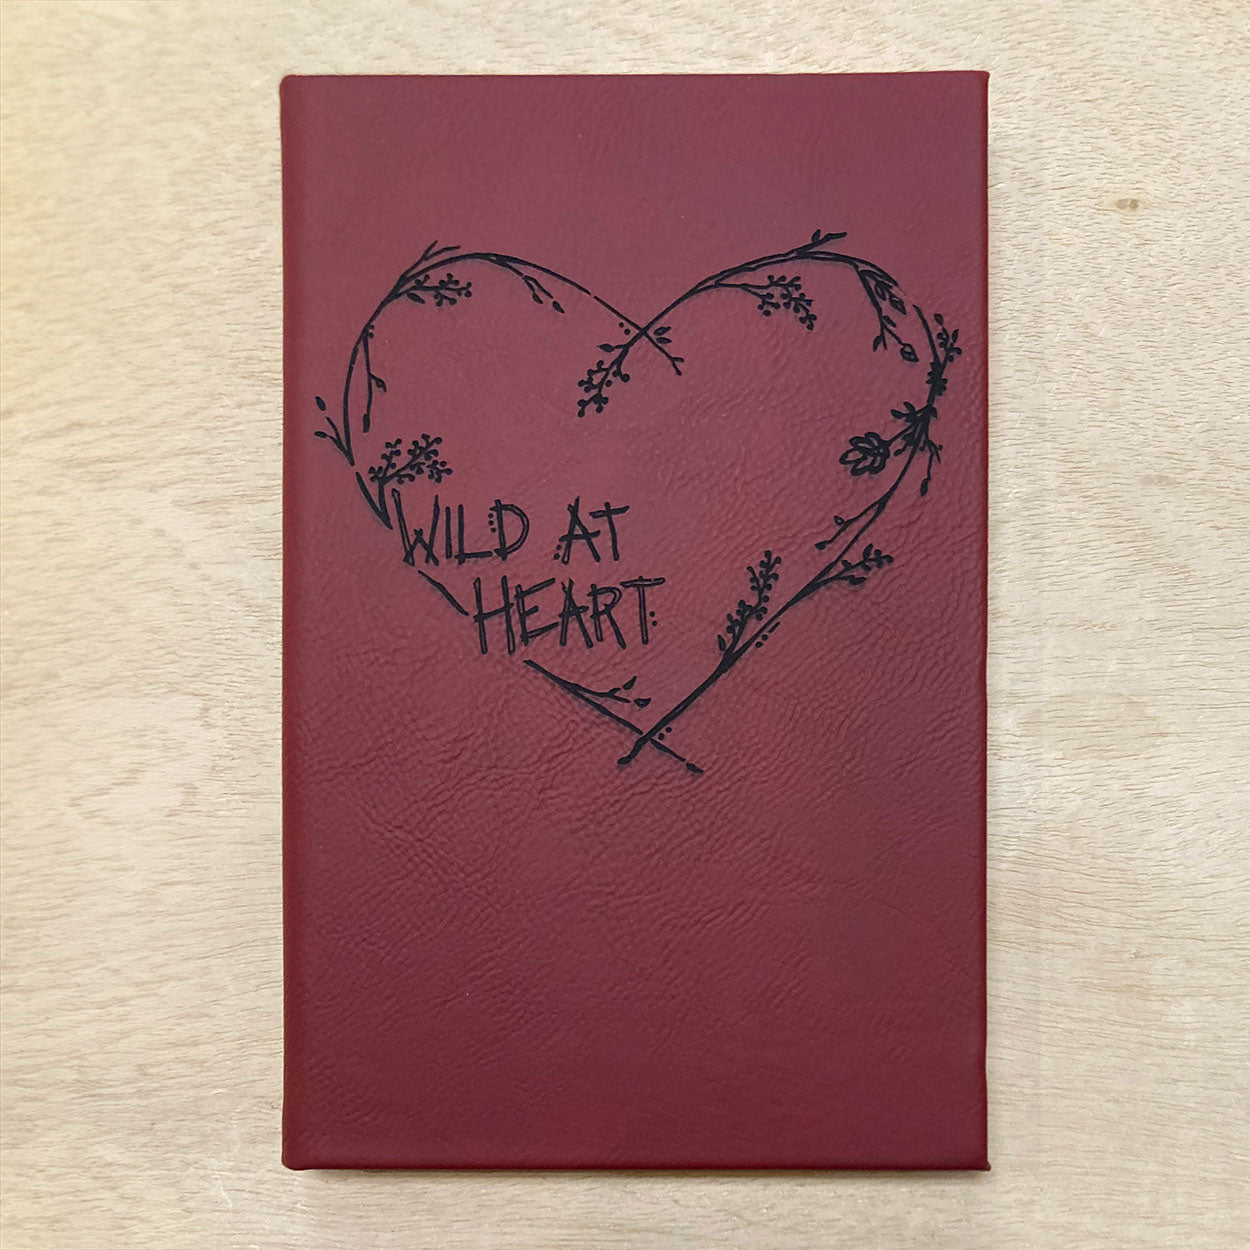 Wild-at-heart-maroon-faux-leather-journal.jpg